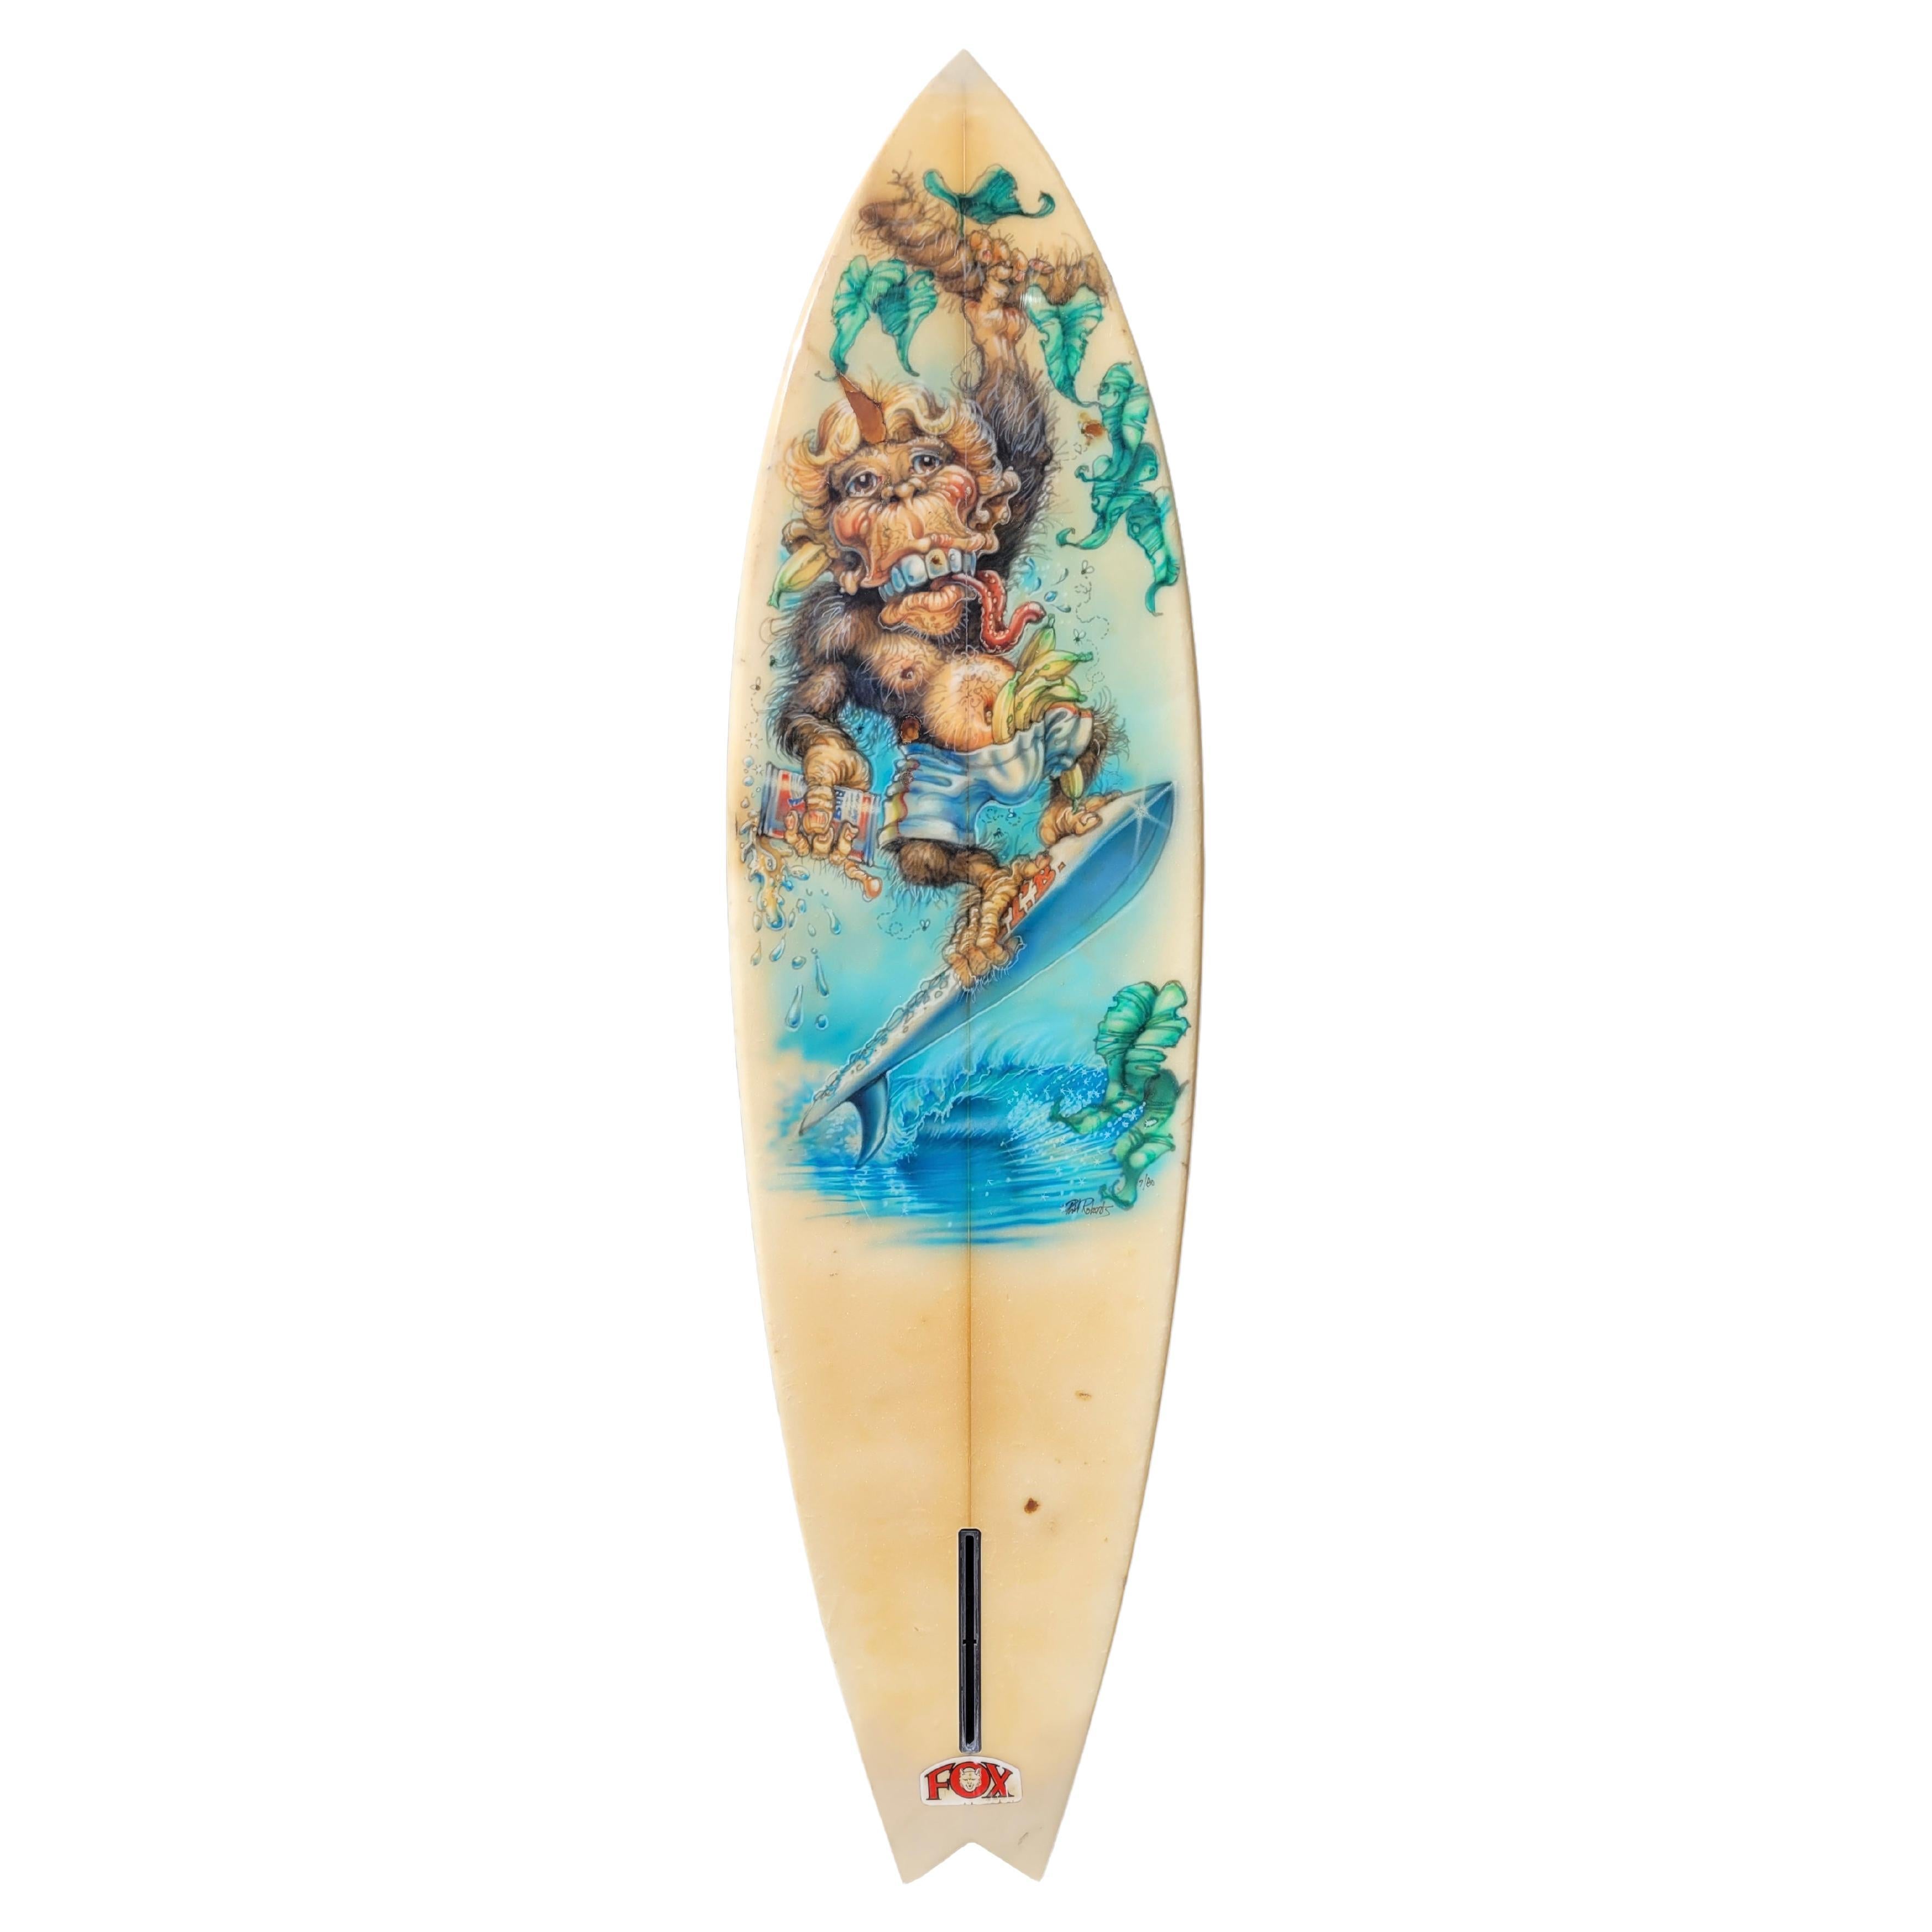 M.T.B. ‘Surfing Monkey’ Surfboard Mural by Phil Roberts For Sale